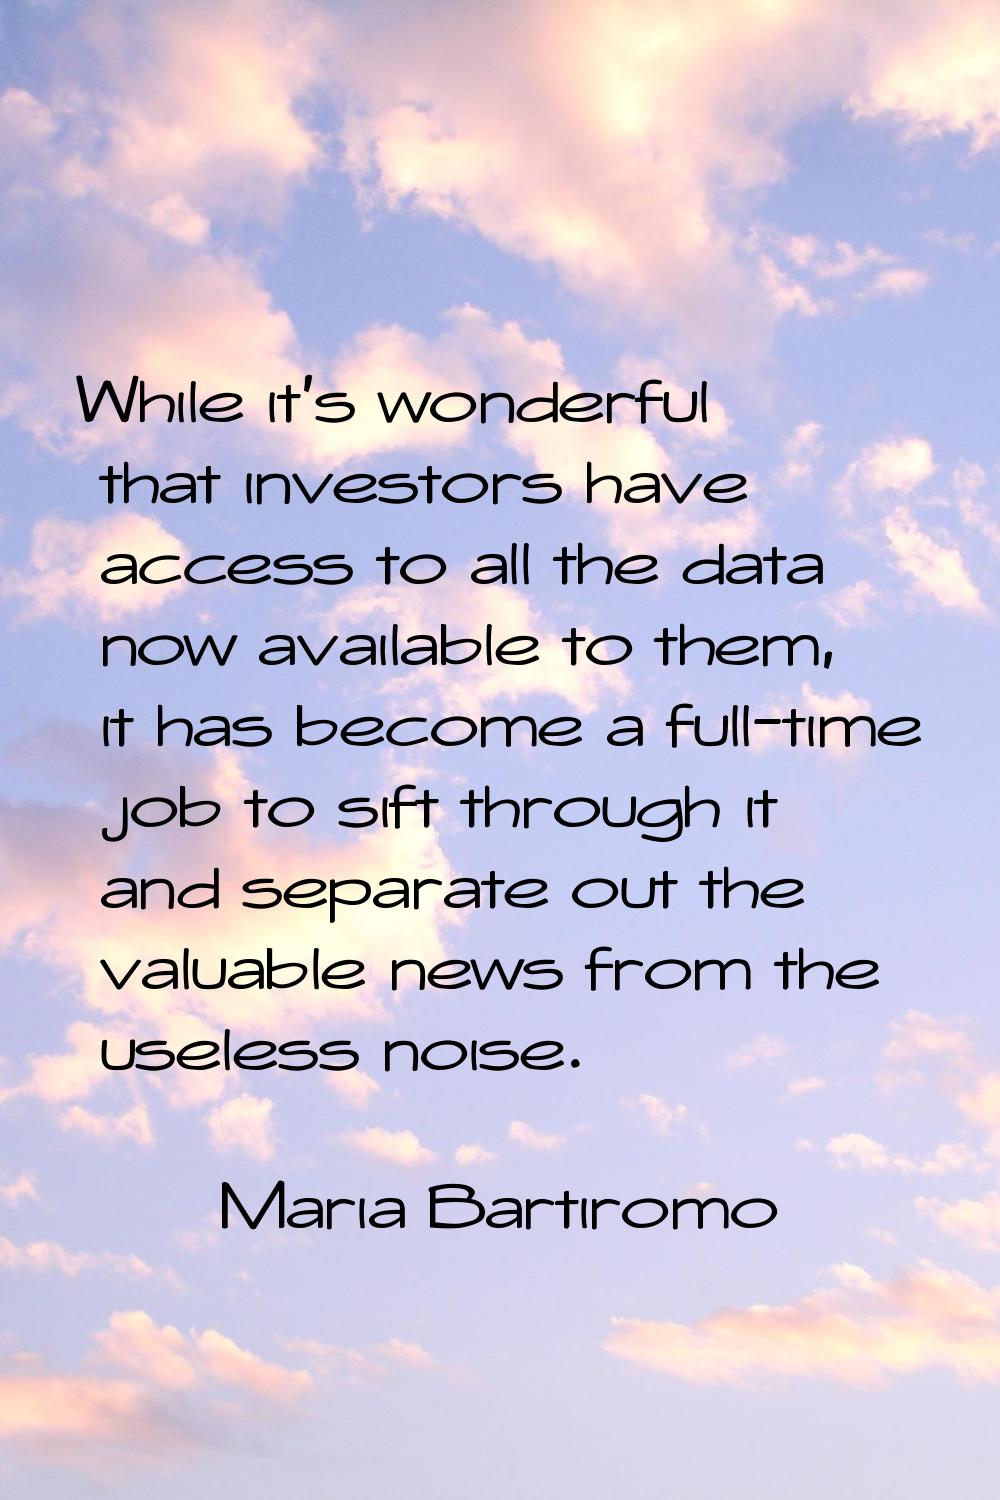 While it's wonderful that investors have access to all the data now available to them, it has becom